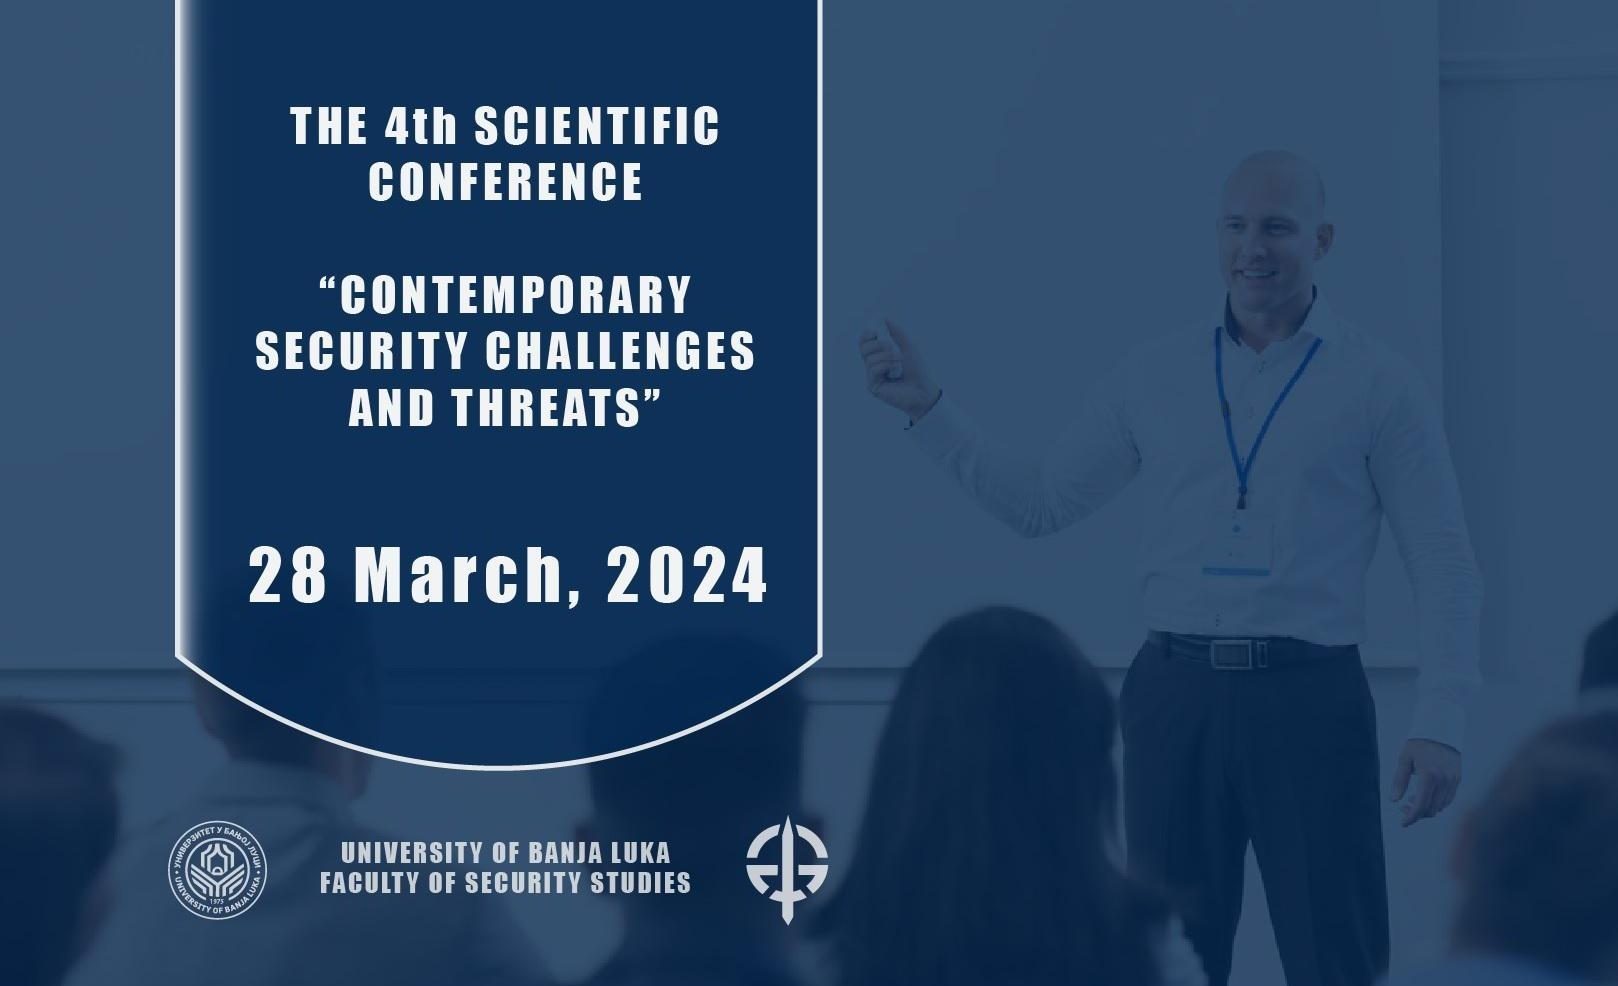 The 4th Scientific Conference of the Faculty of Security Studies “Contemporary Security Challenges and Threats”